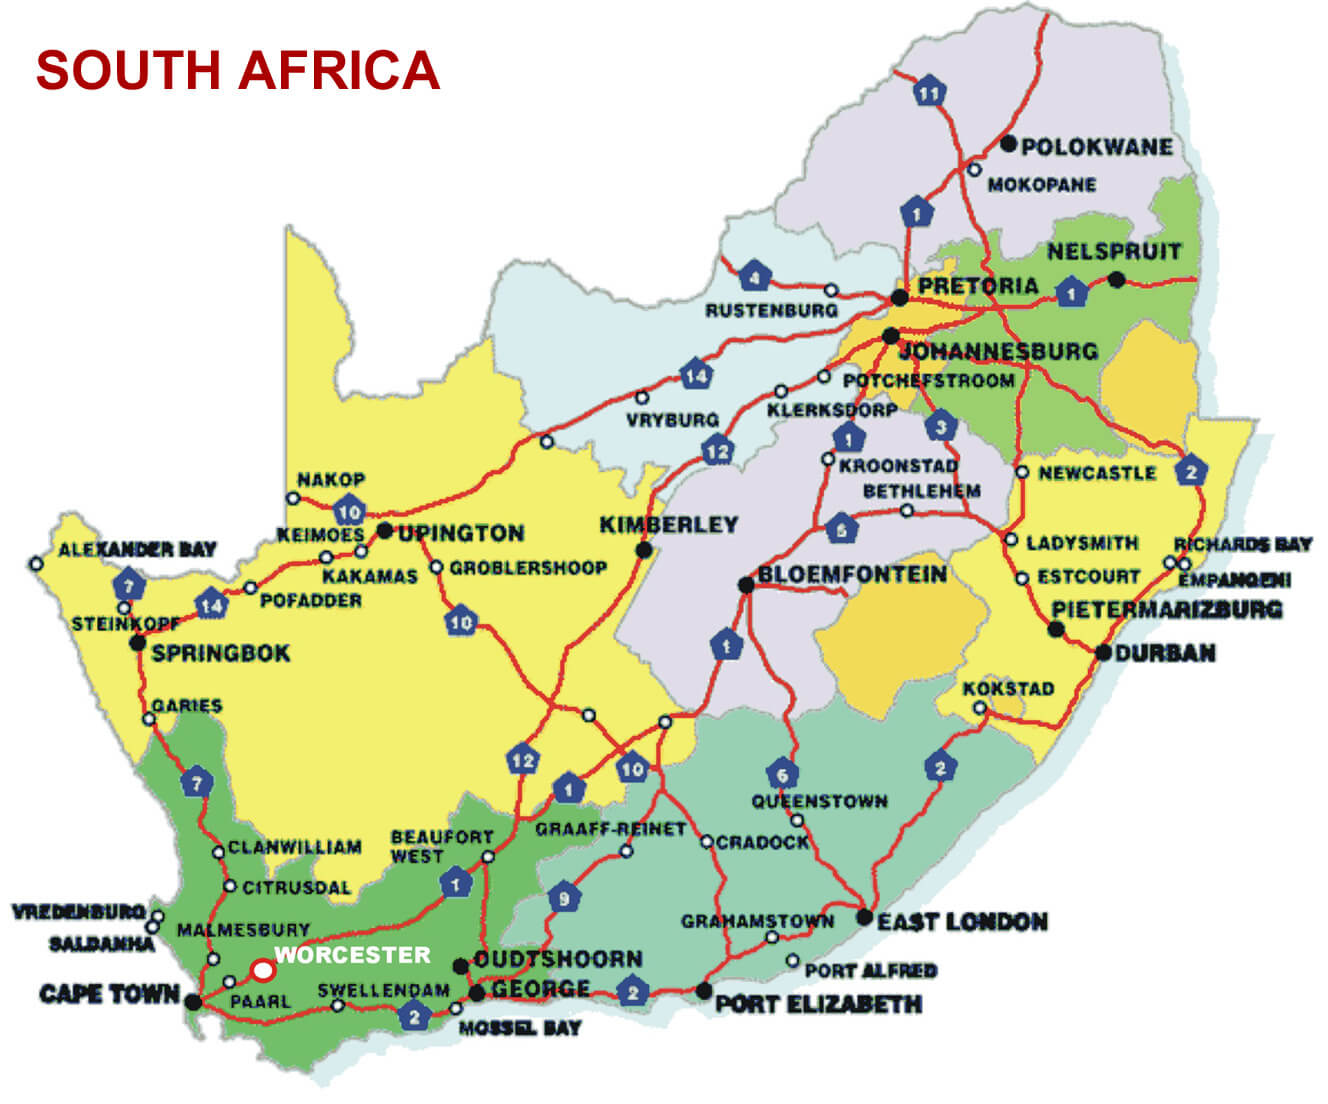 South Africa Map With Provinces And Capital Cities - Cleveland Browns ...